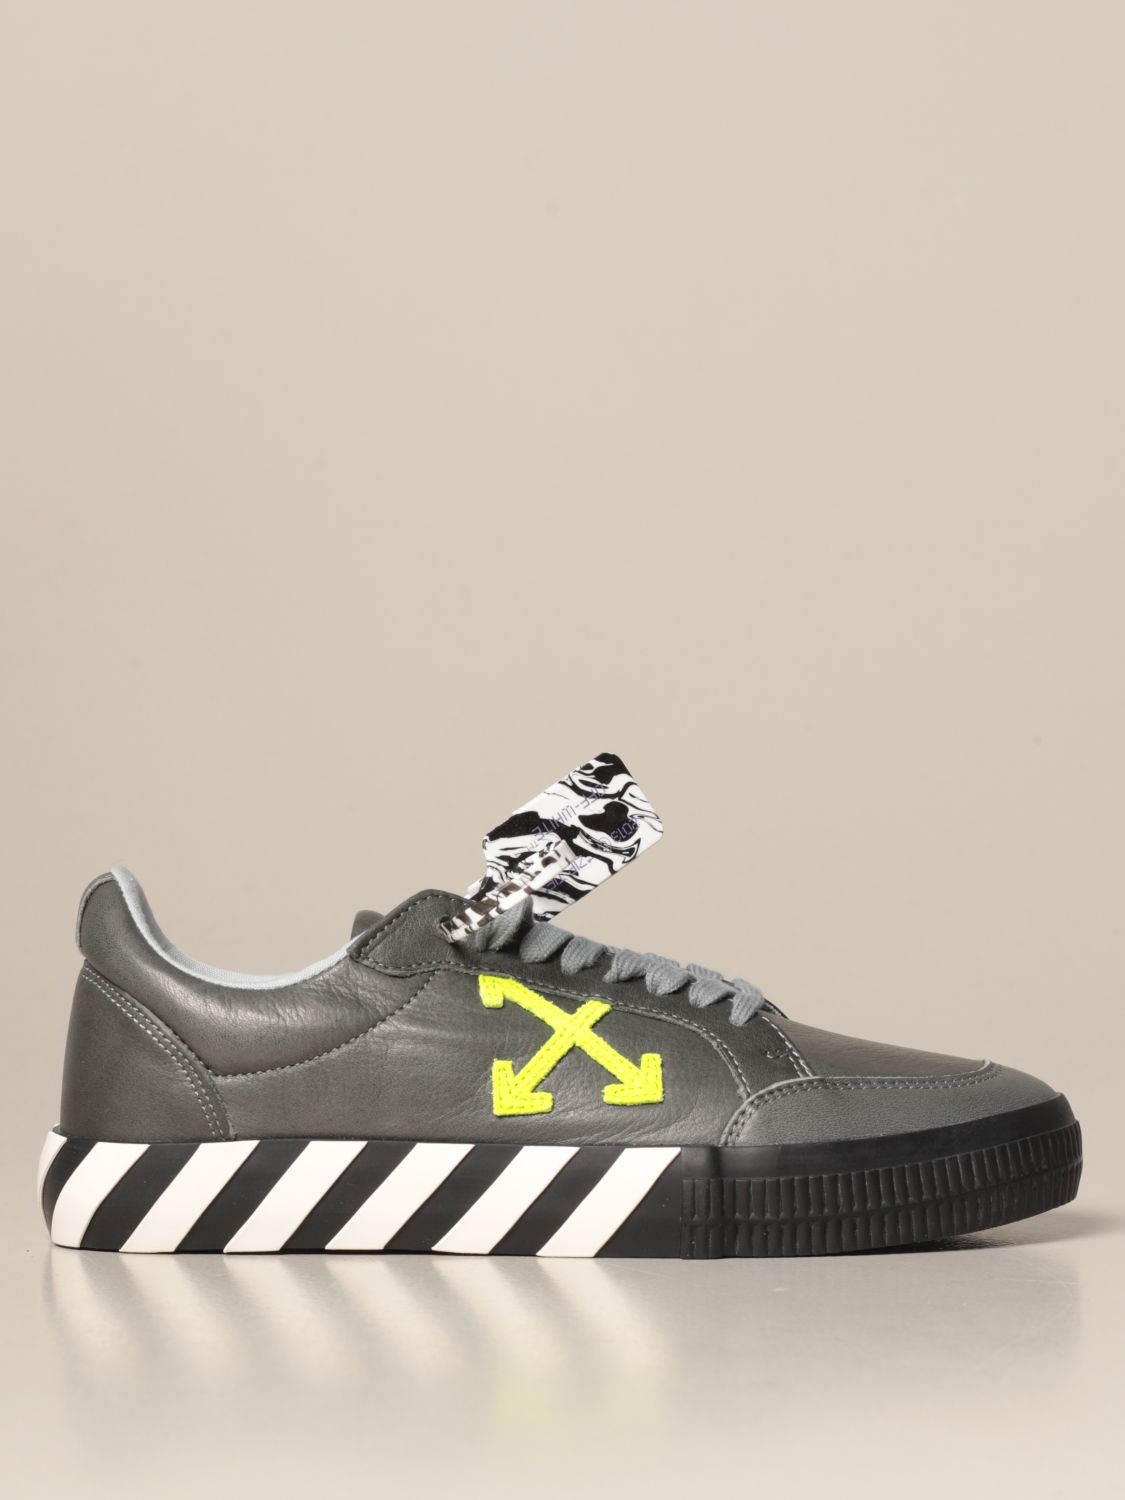 off white grey shoes